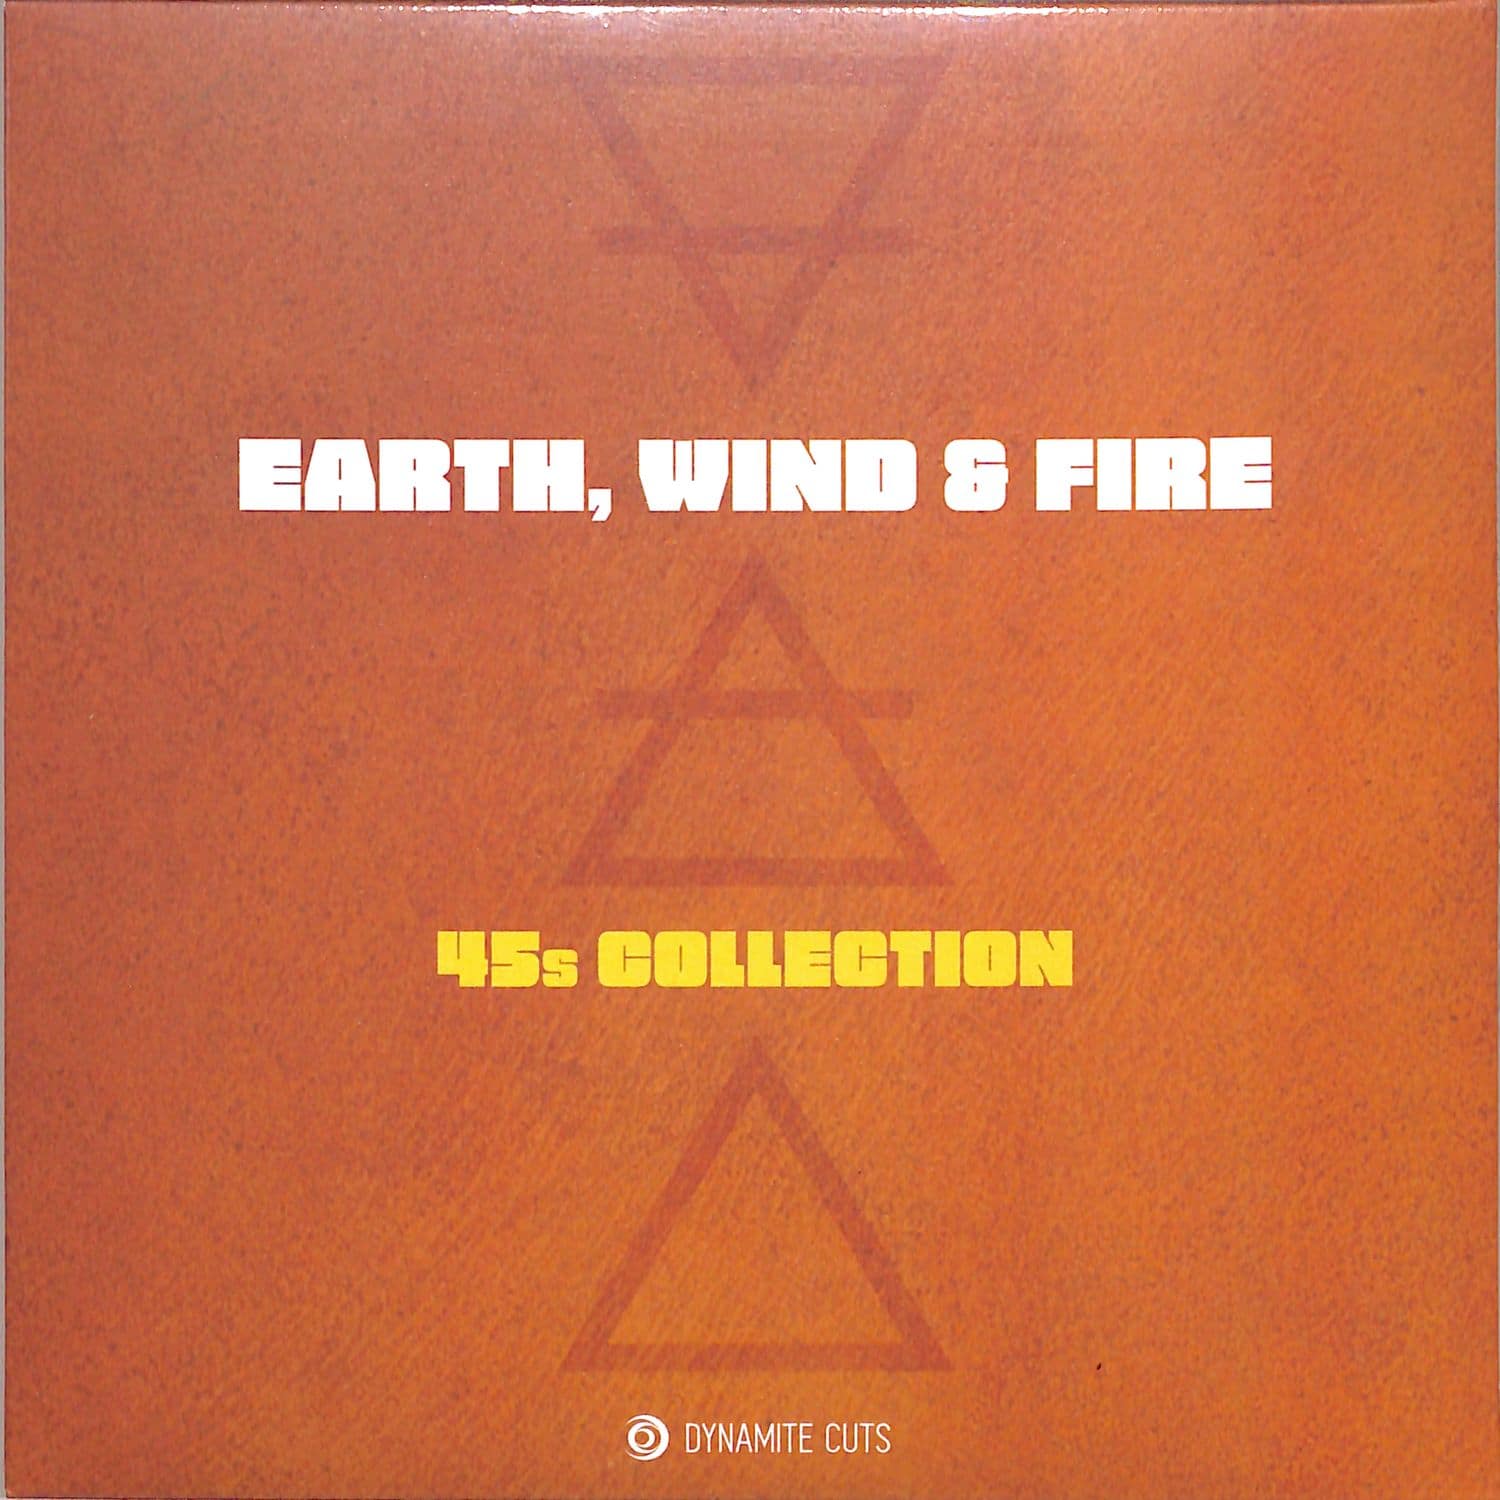 Earth, Wind & Fire - 45s COLLECTION  